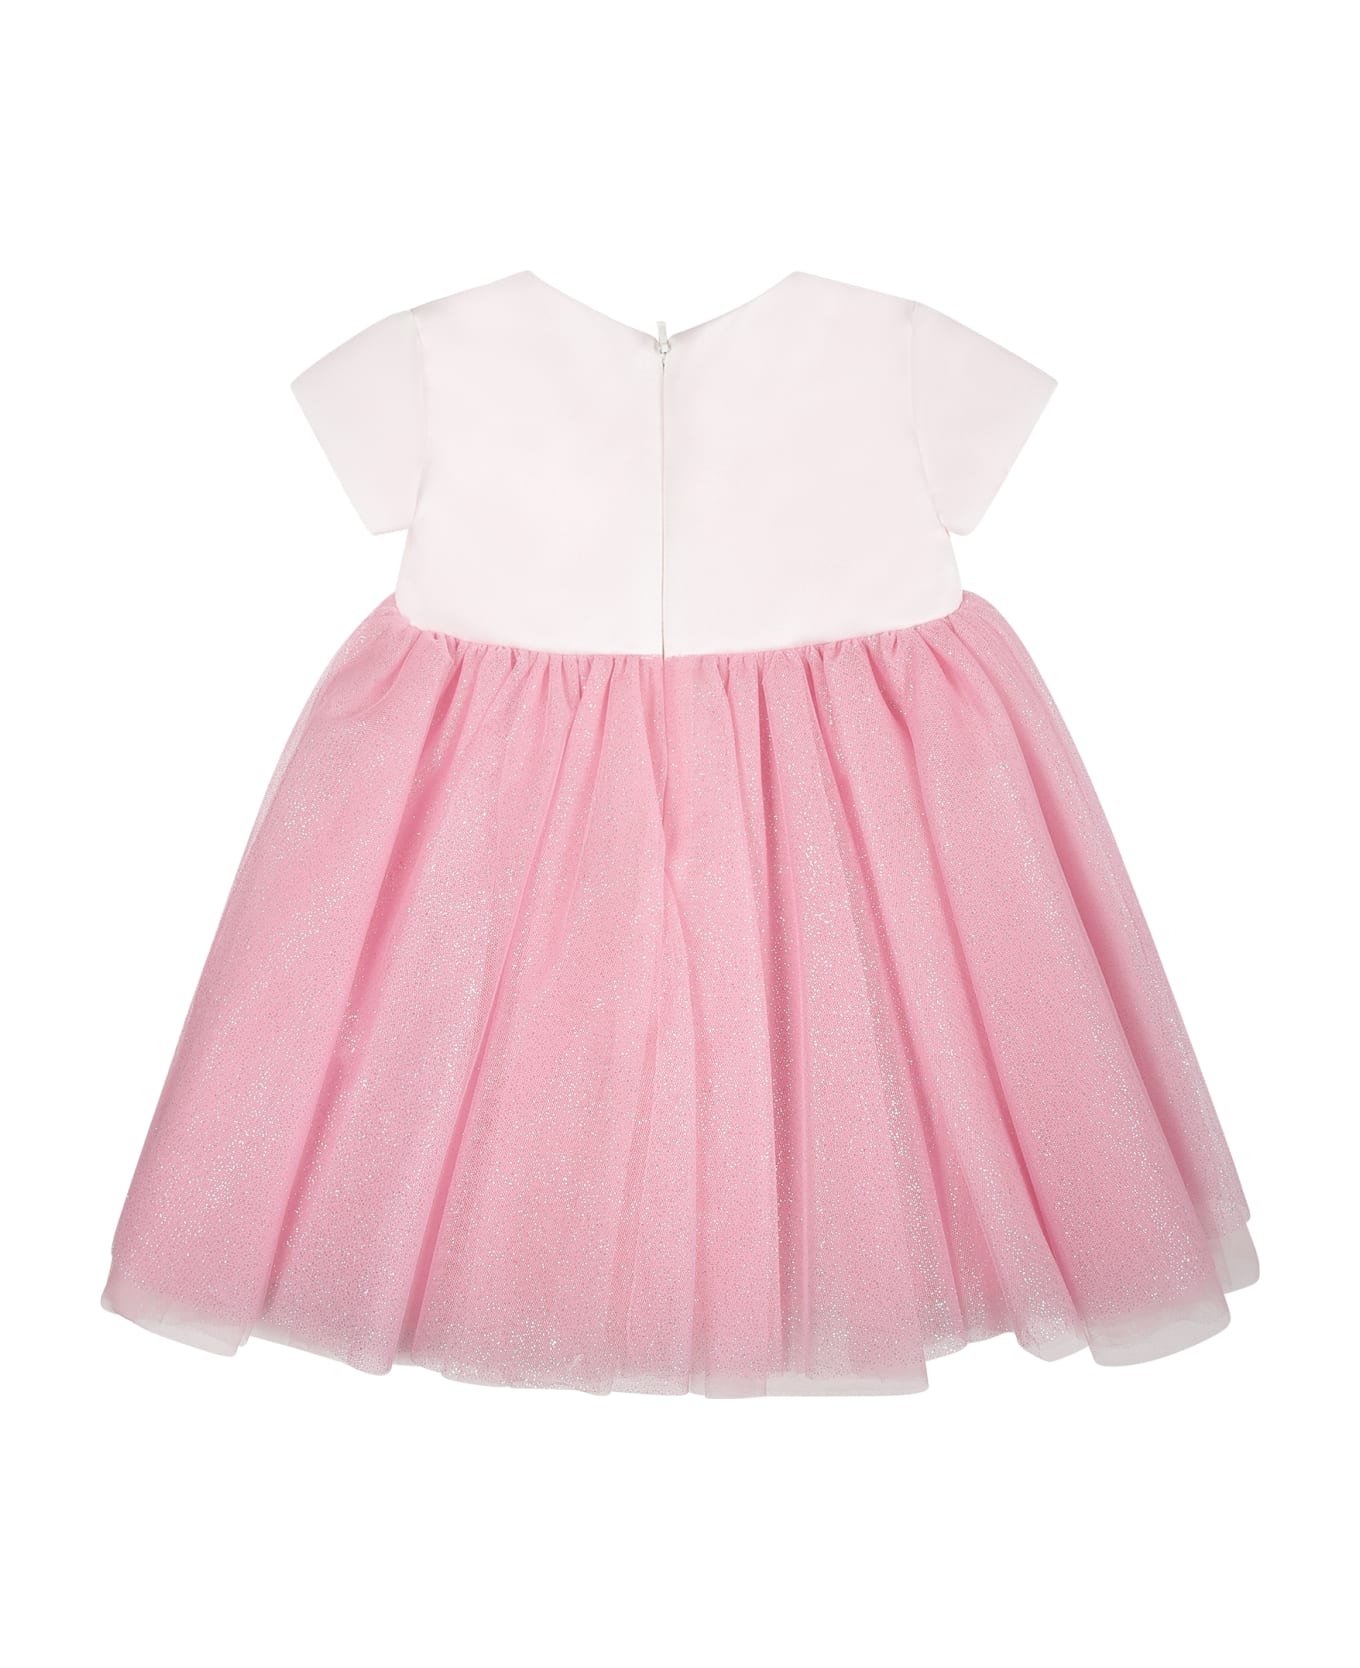 Monnalisa Pink Dress For Baby Girl With Daisies And Lurex - Pink ウェア